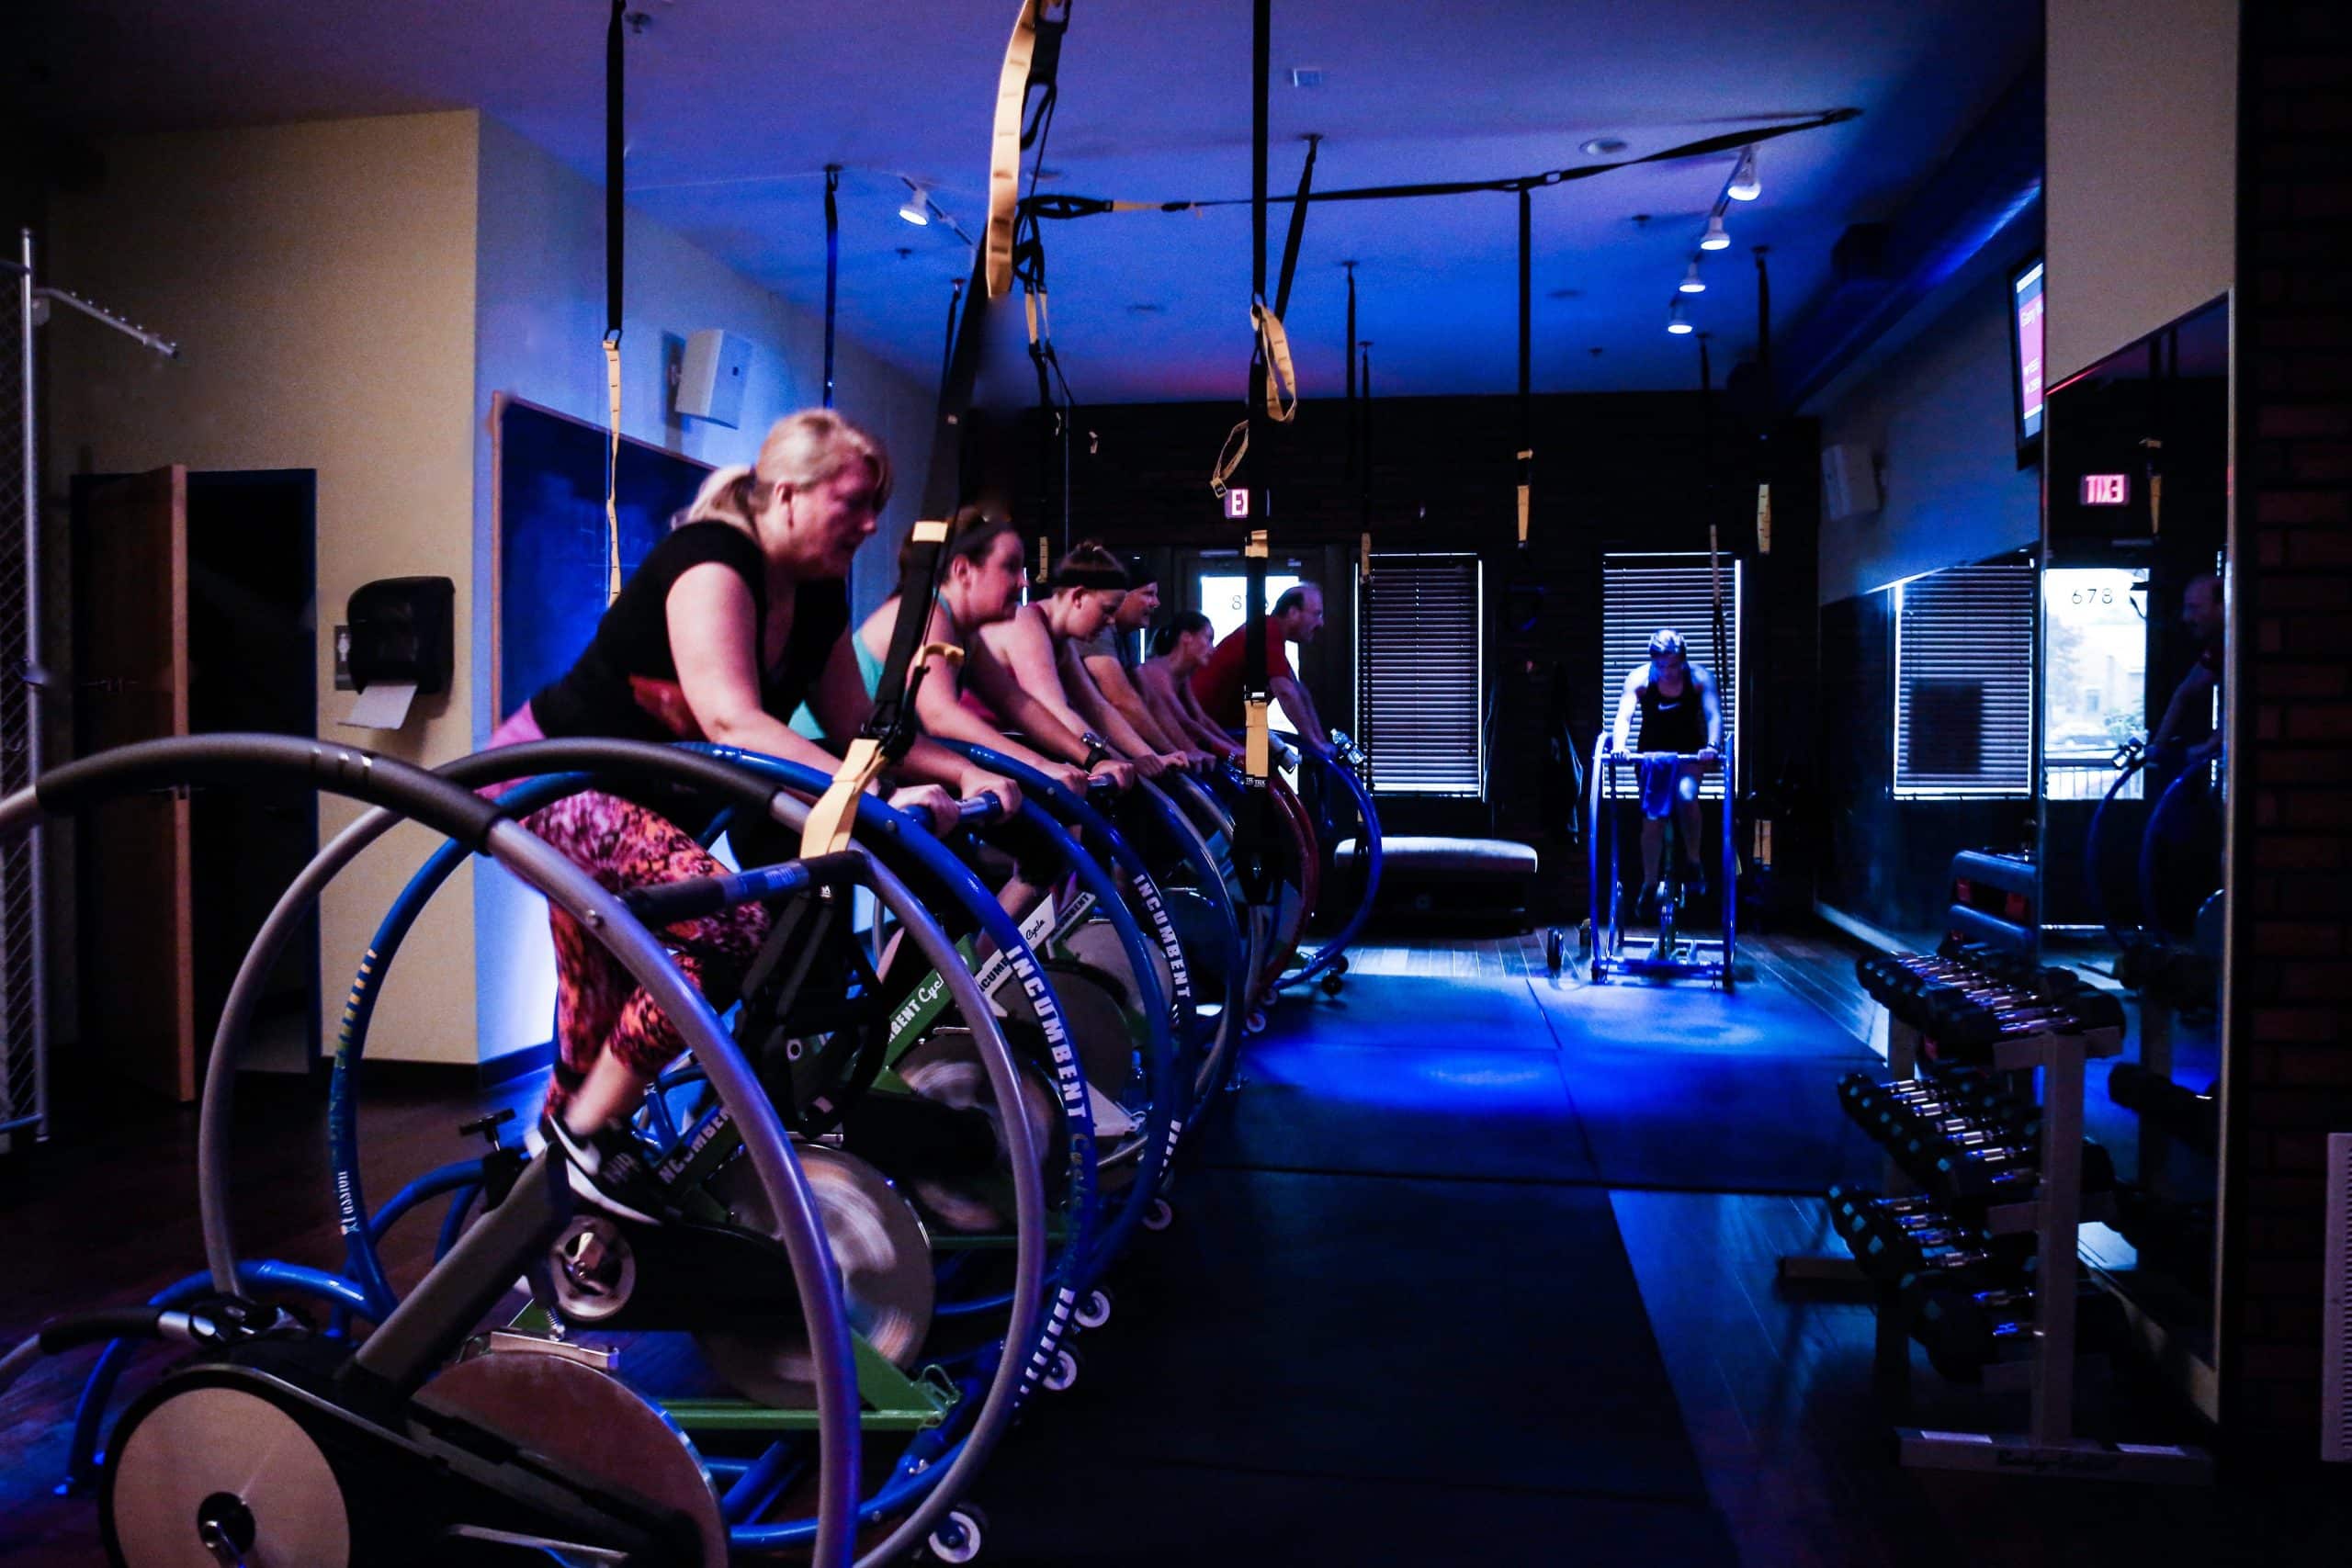 The Cycle 360 – An Intense Workout Without Risk of Injury